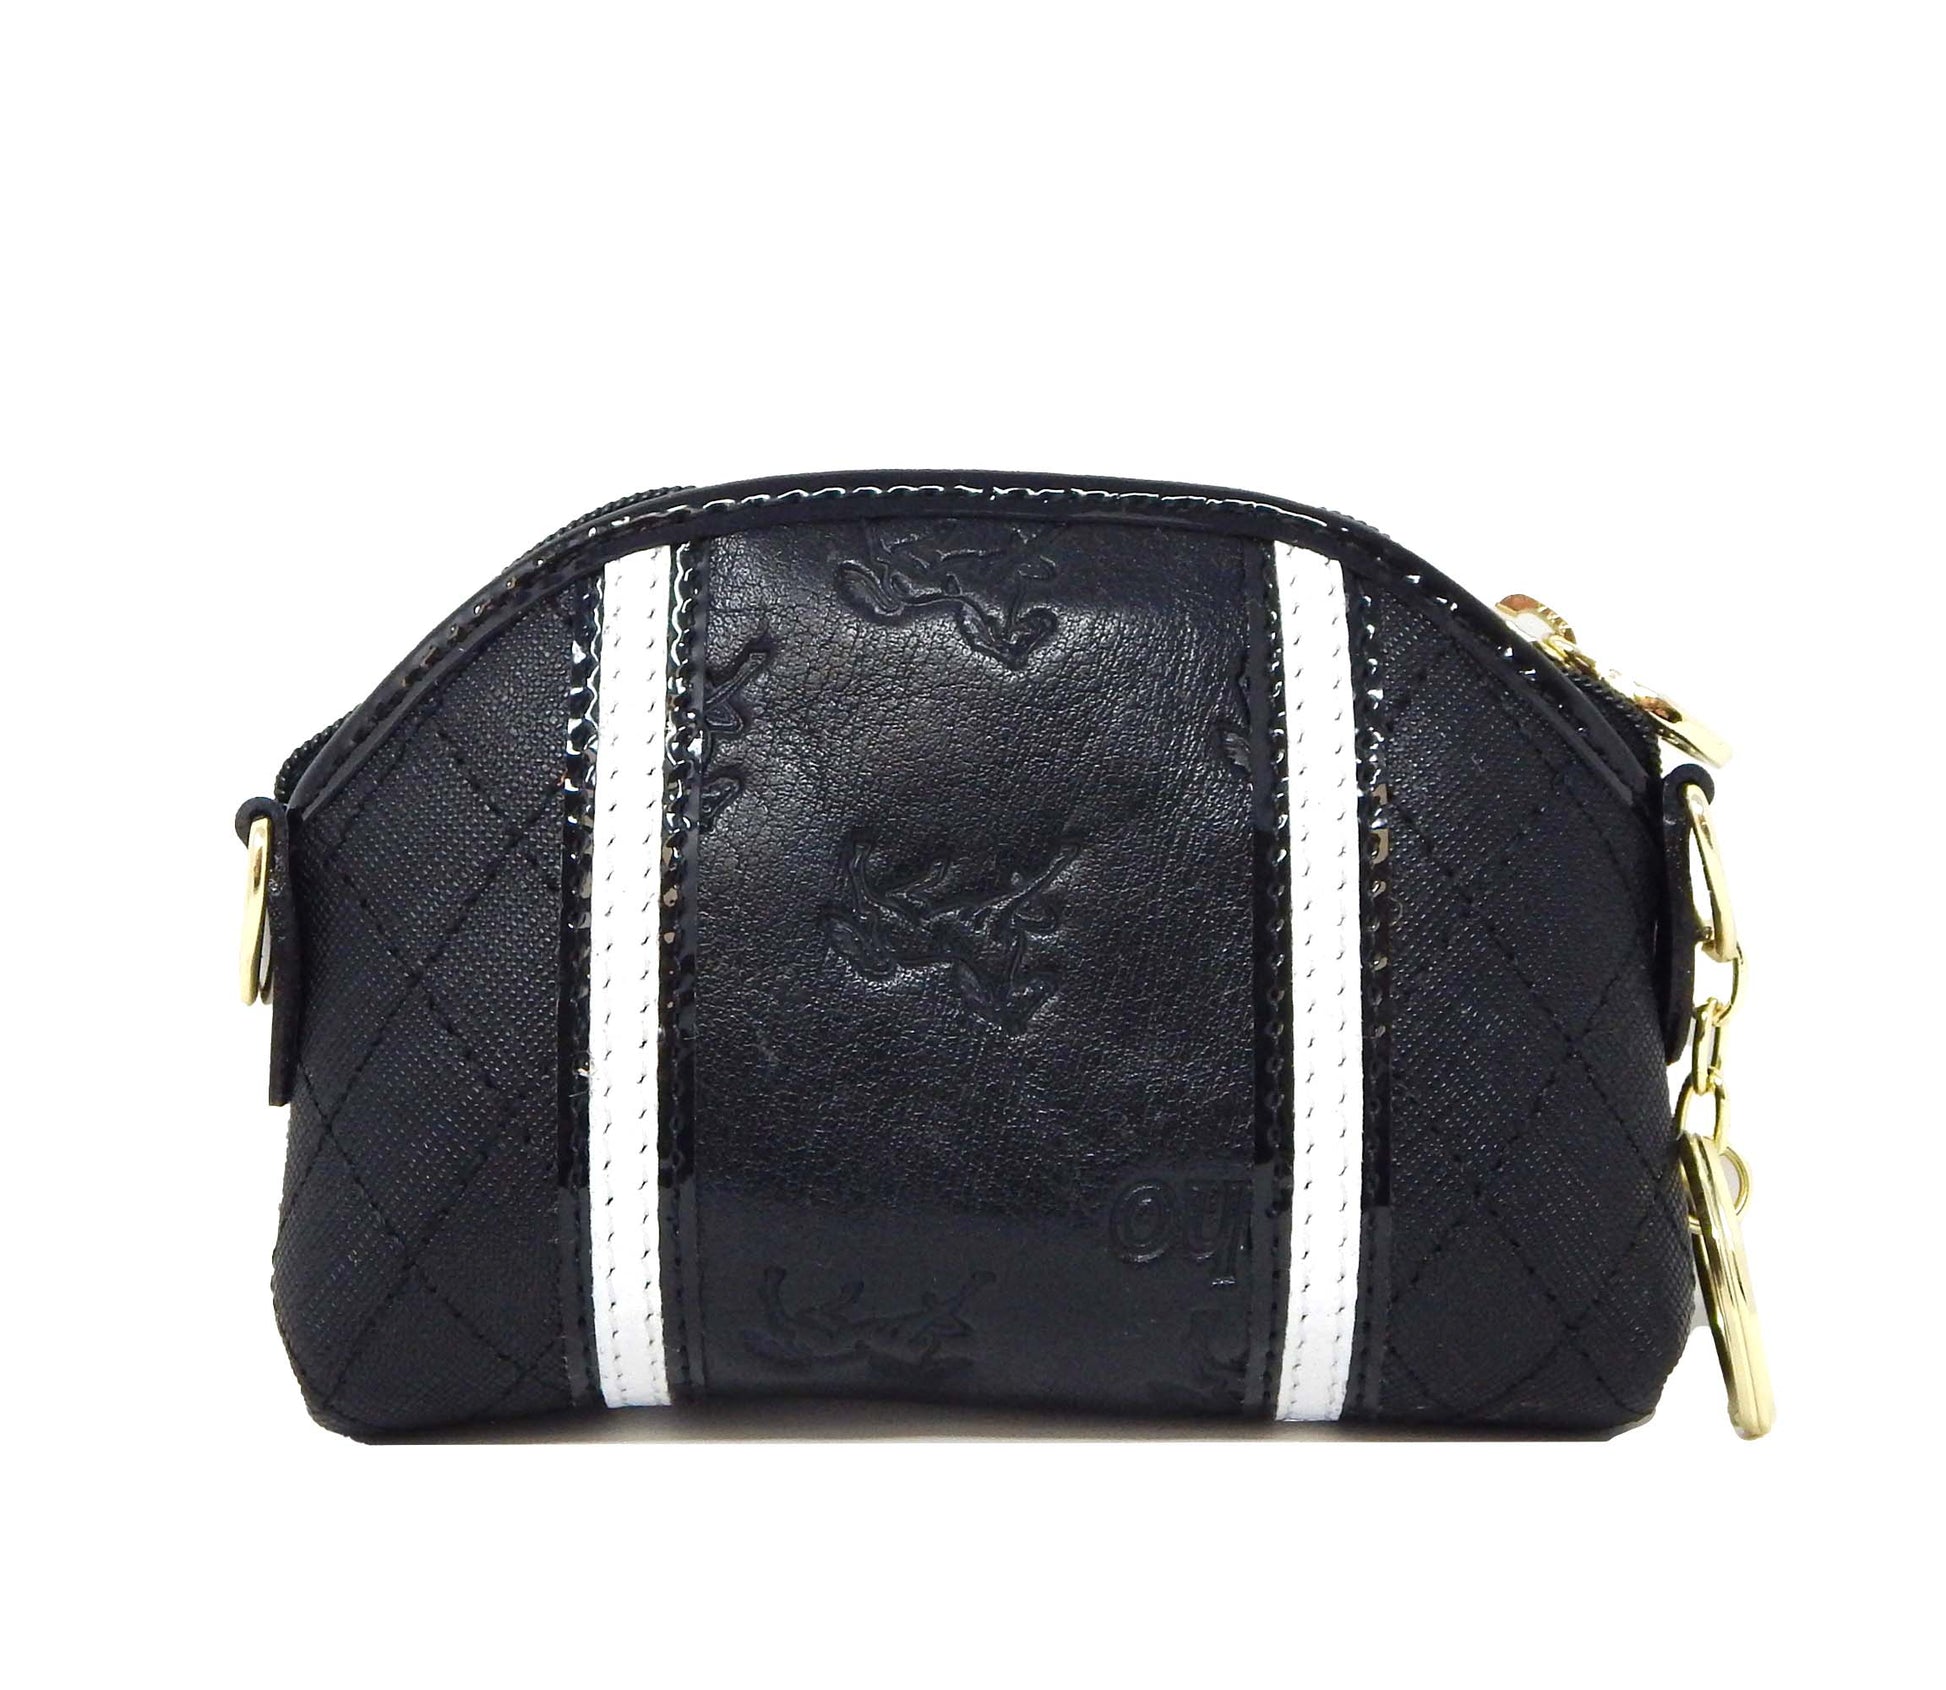 #color_ Black and White | Cavalinho Royal Change Purse - Black and White - 28390252.21.99_2